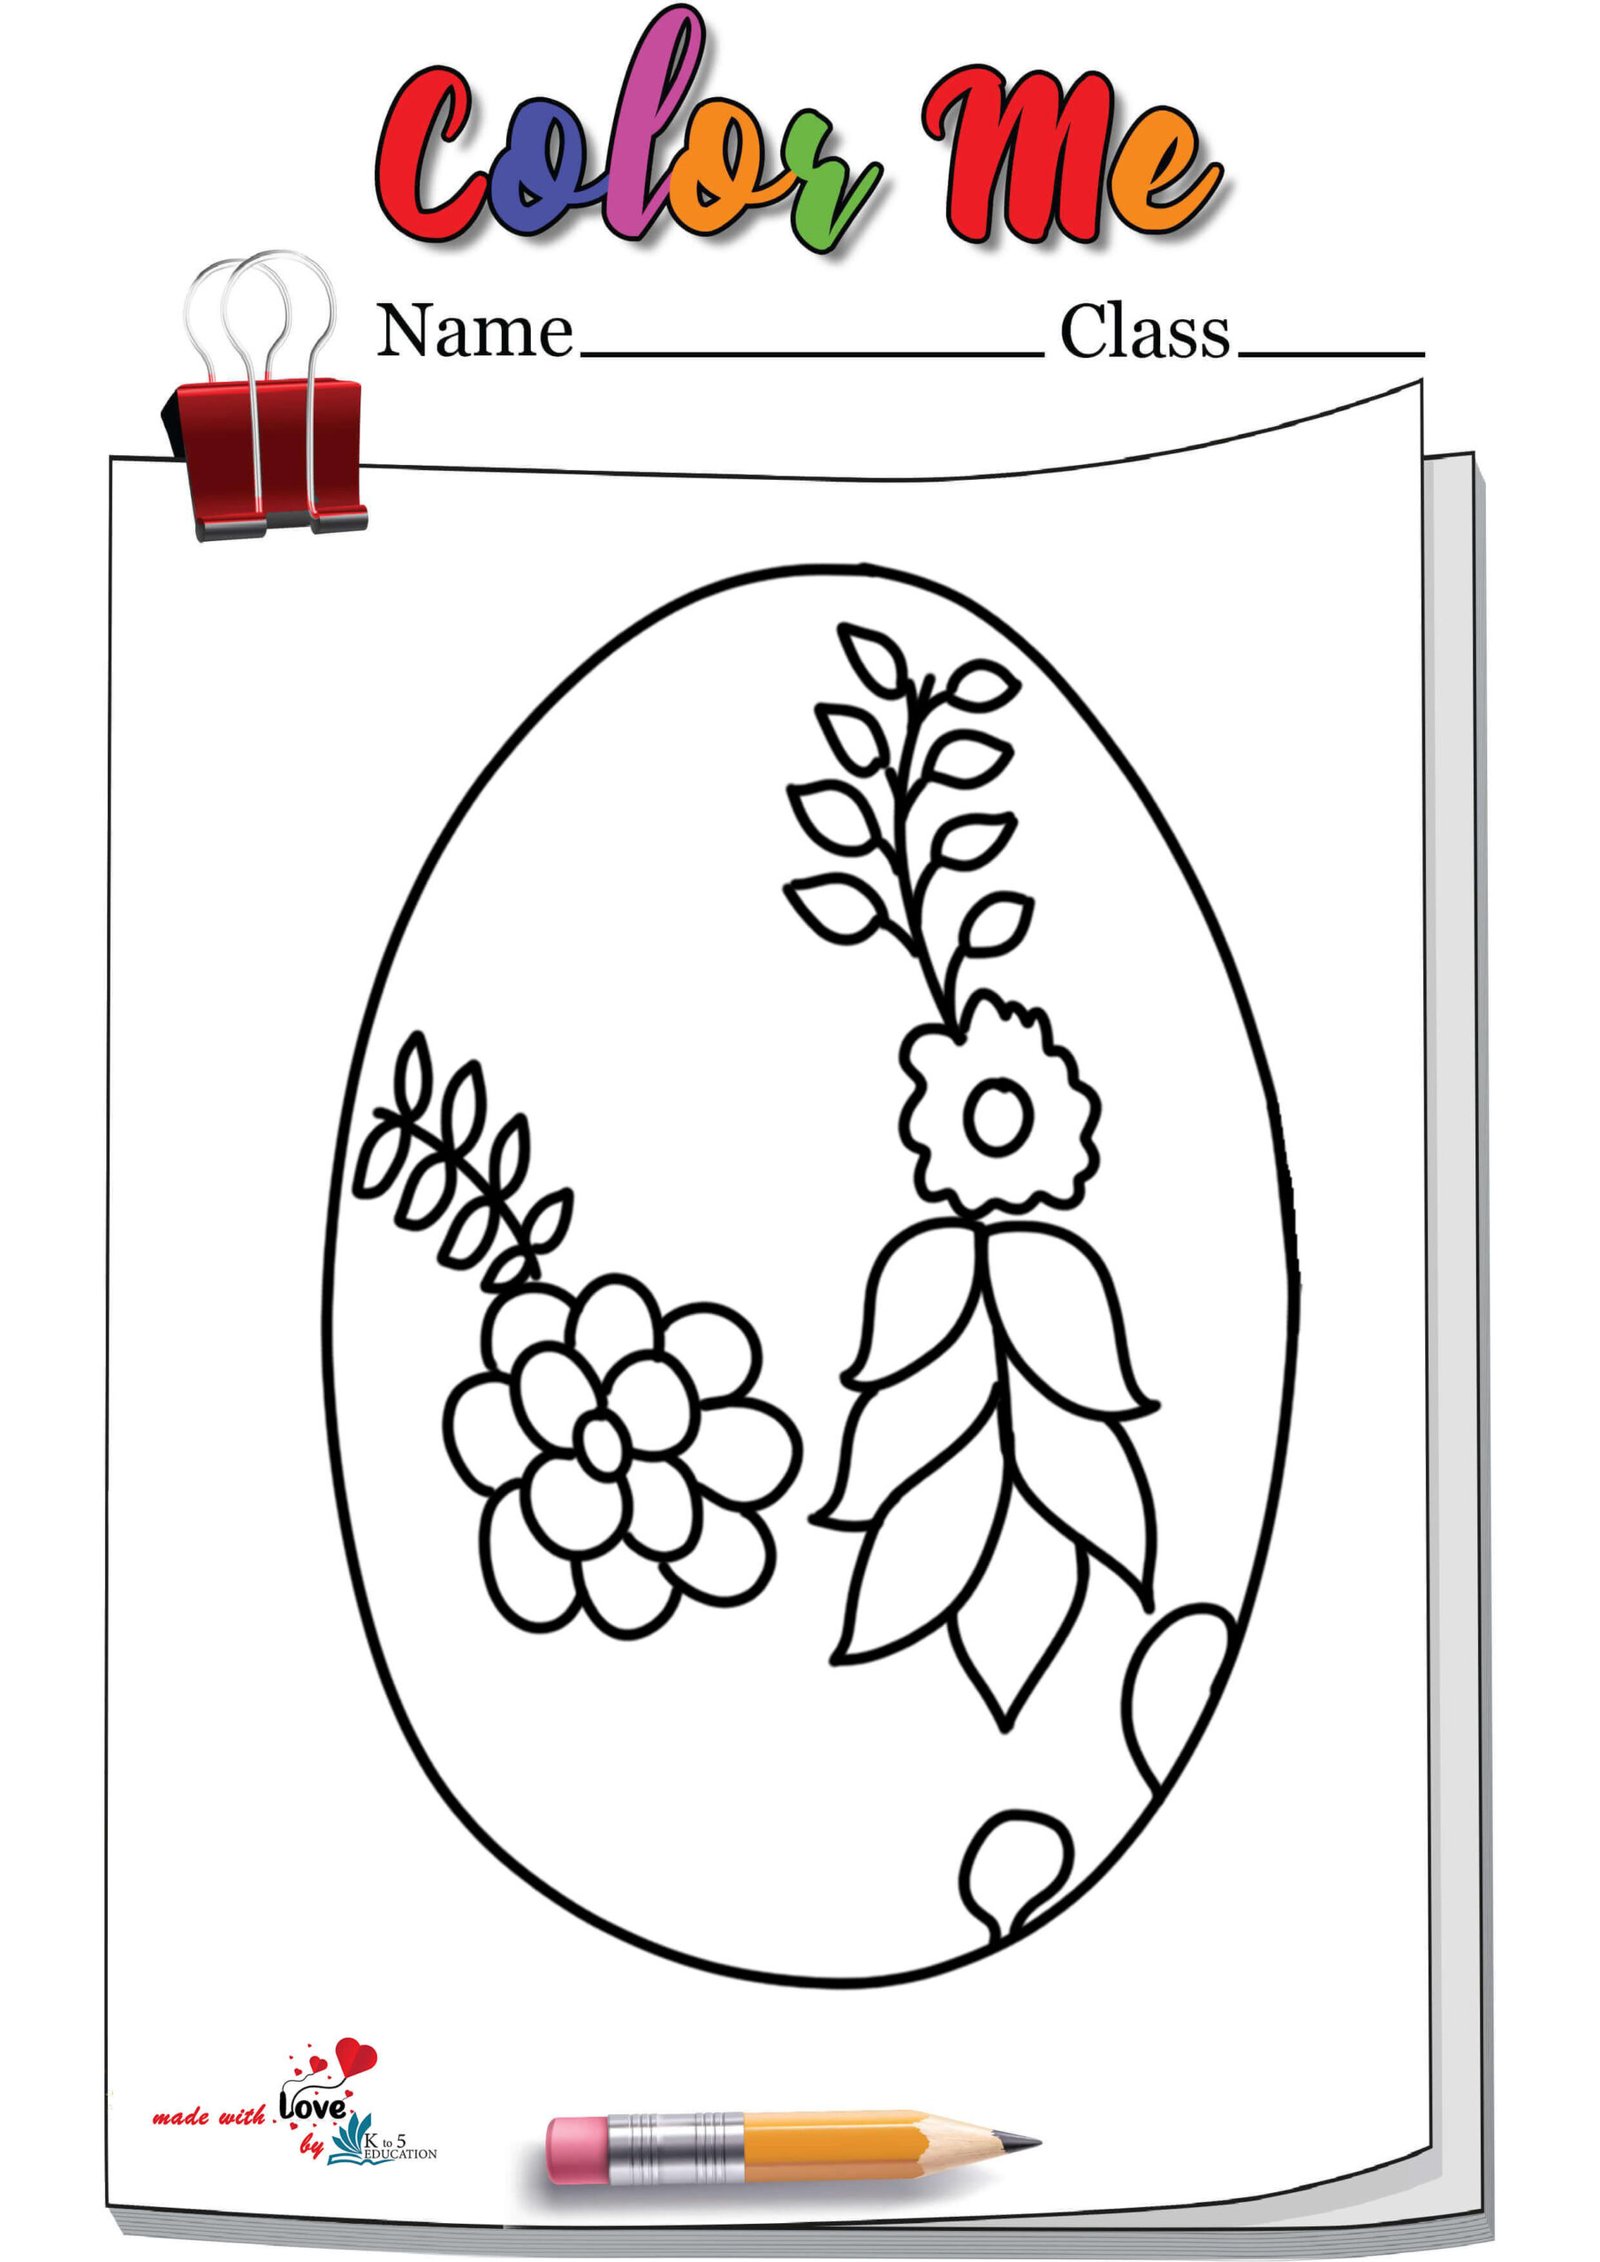 Coloring Giant Easter Egg Coloring Page